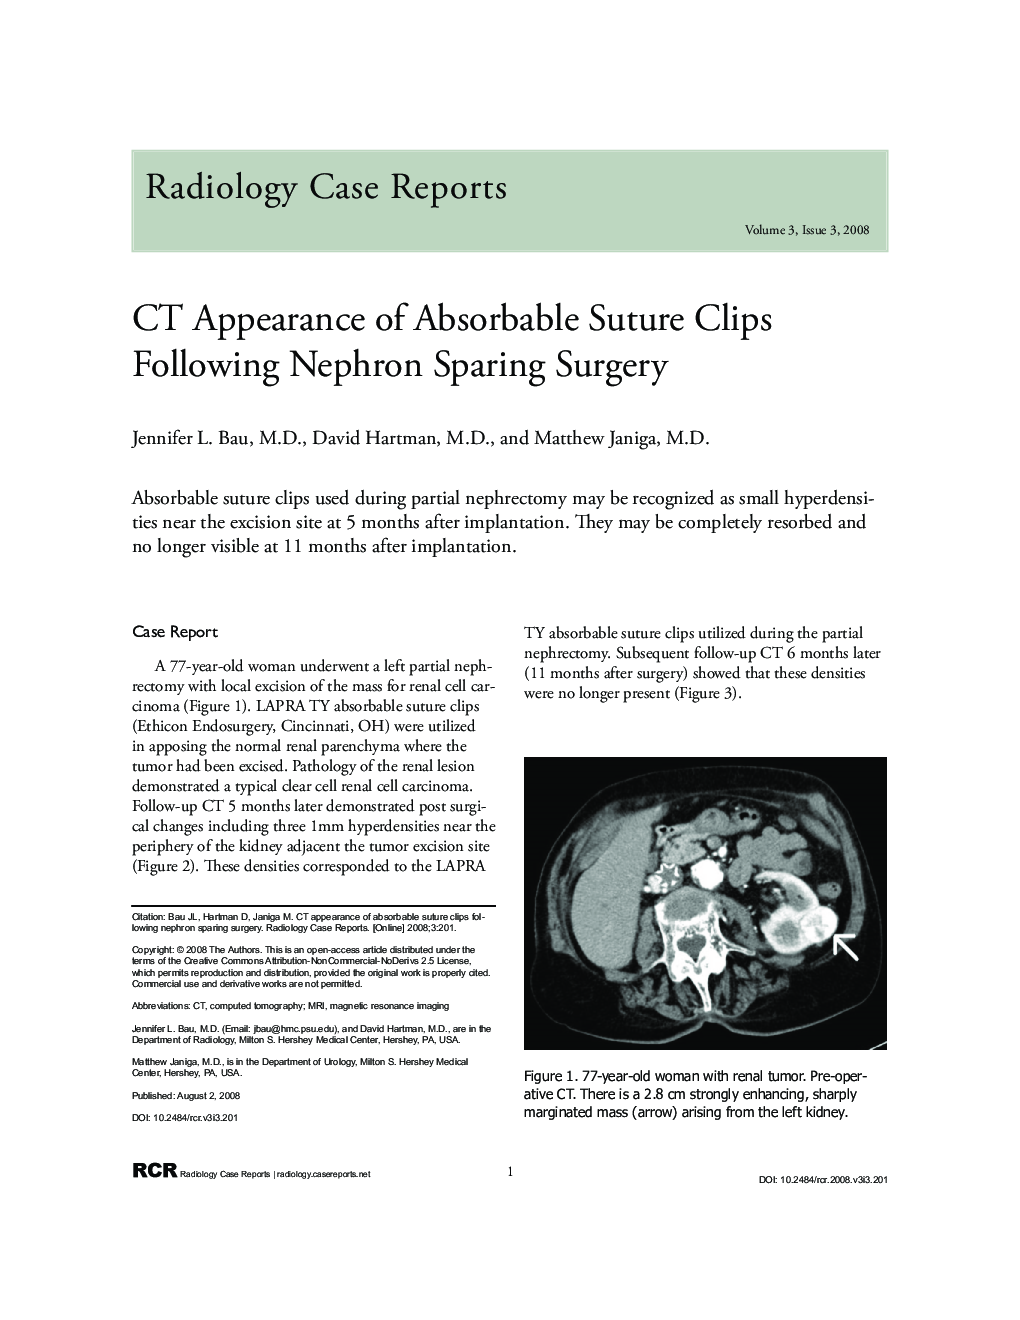 CT Appearance of Absorbable Suture Clips Following Nephron Sparing Surgery